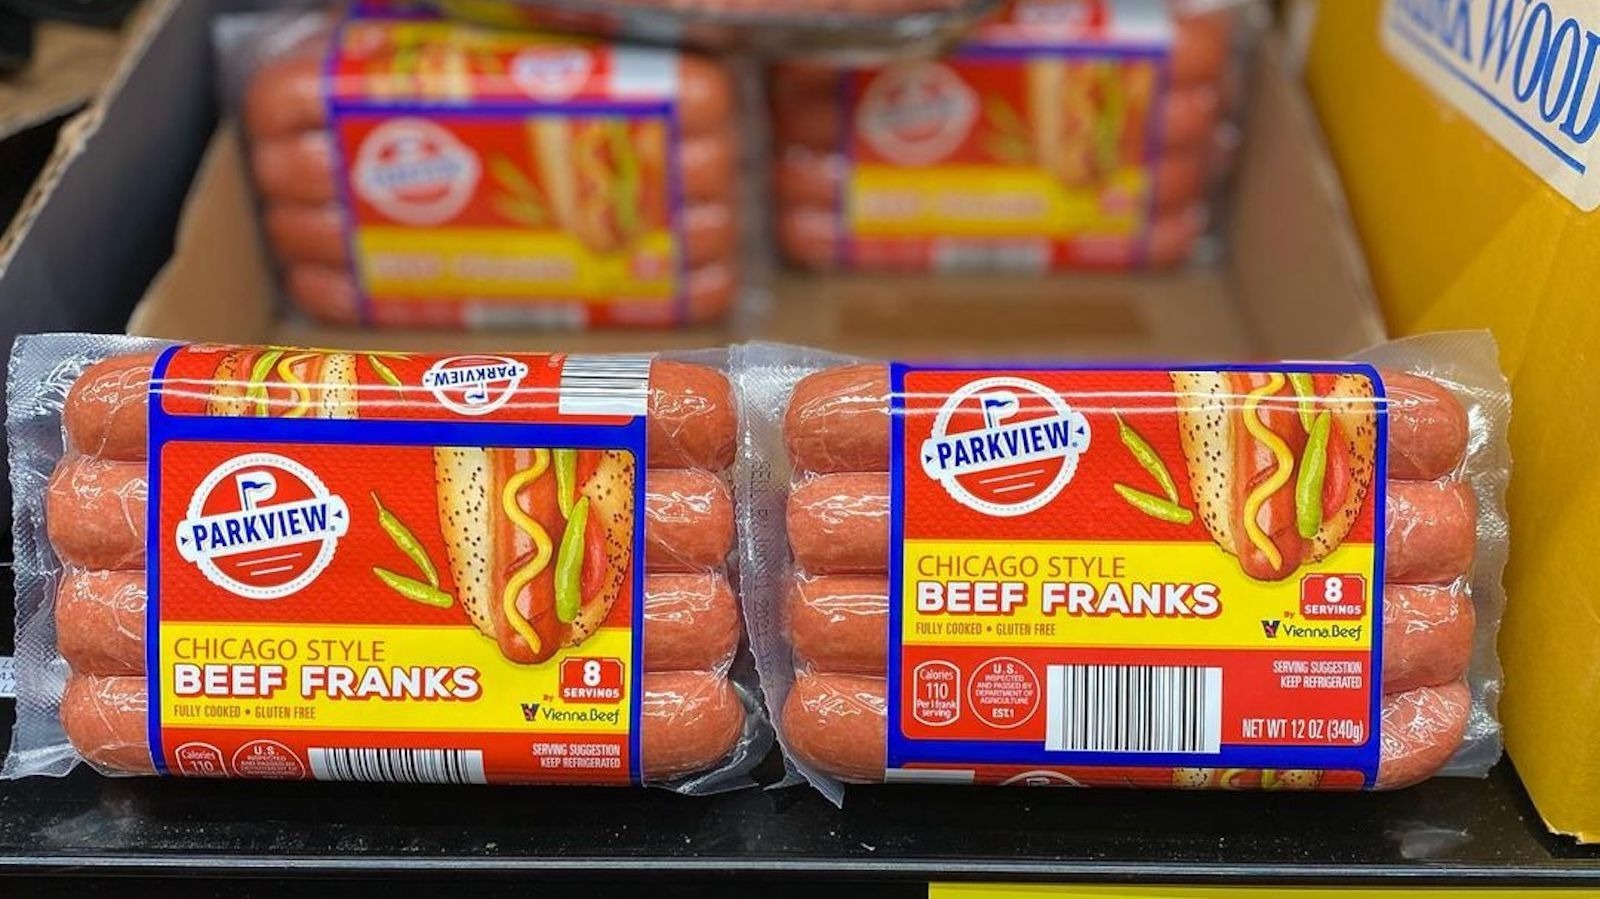 https://www.thedailymeal.com/img/gallery/aldis-vienna-beef-hot-dogs-bring-the-taste-of-chicago-to-every-home/l-intro-1687371973.jpg